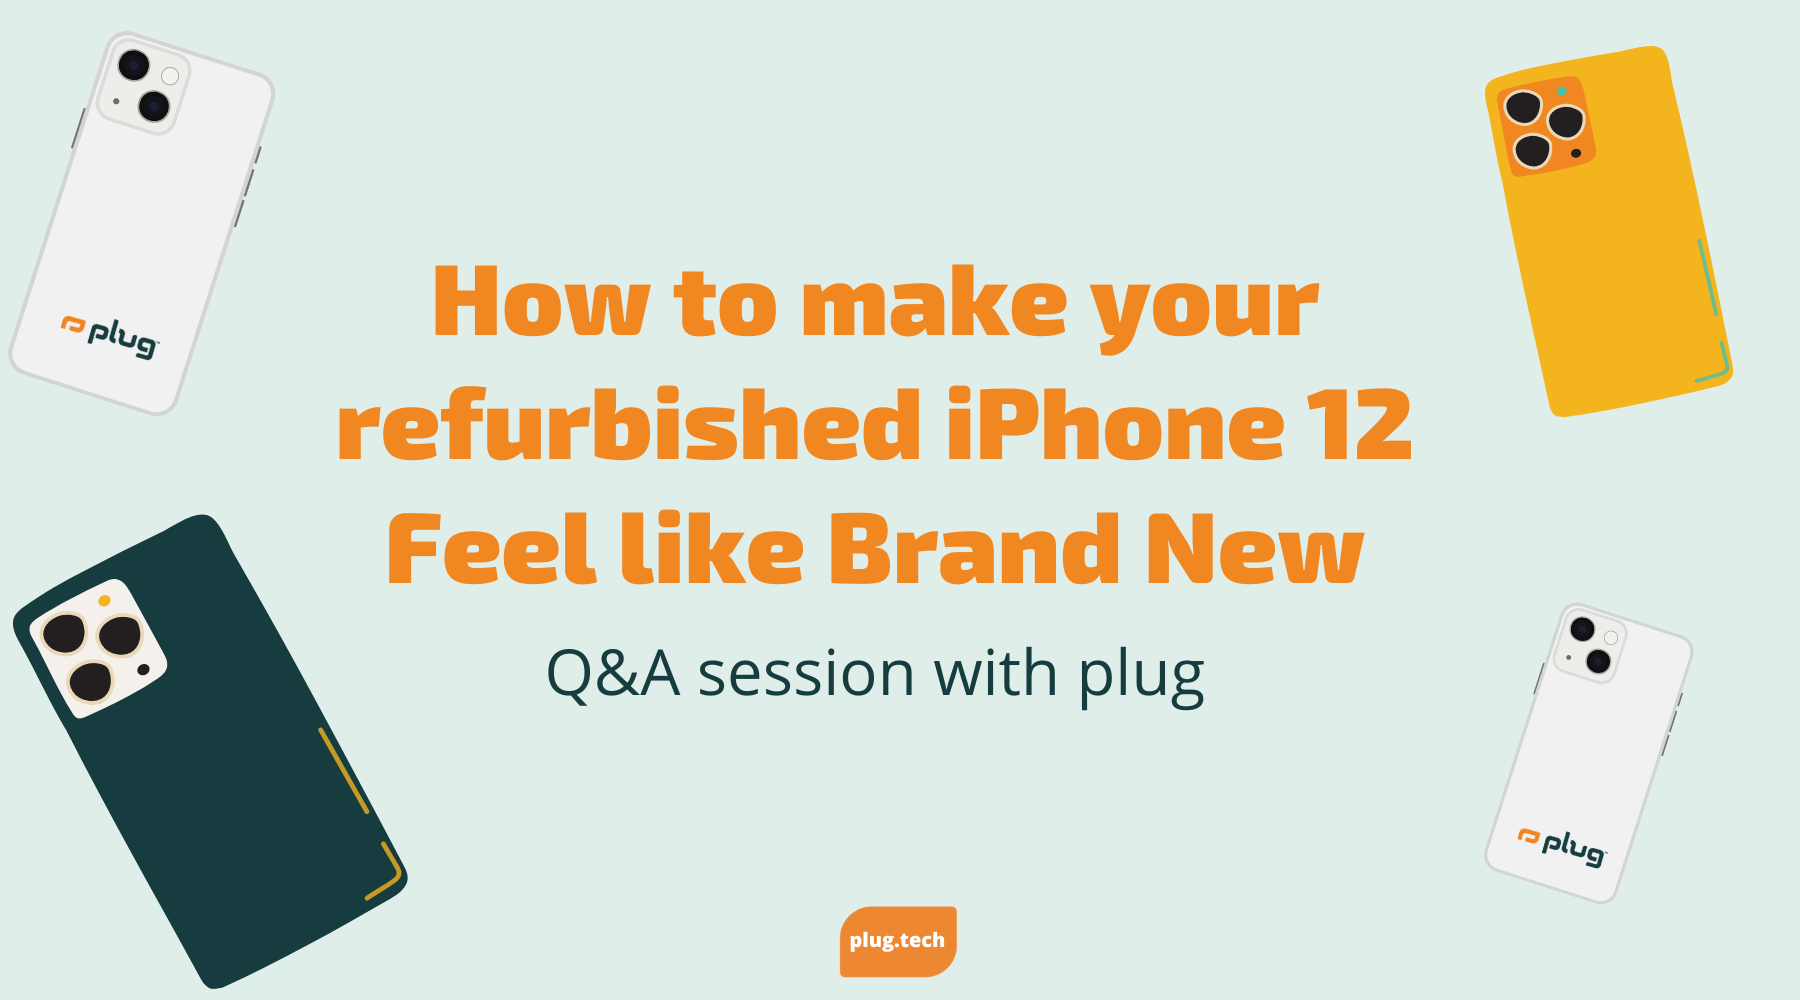 How to make your refurbished iPhone 12 Feel like Brand New